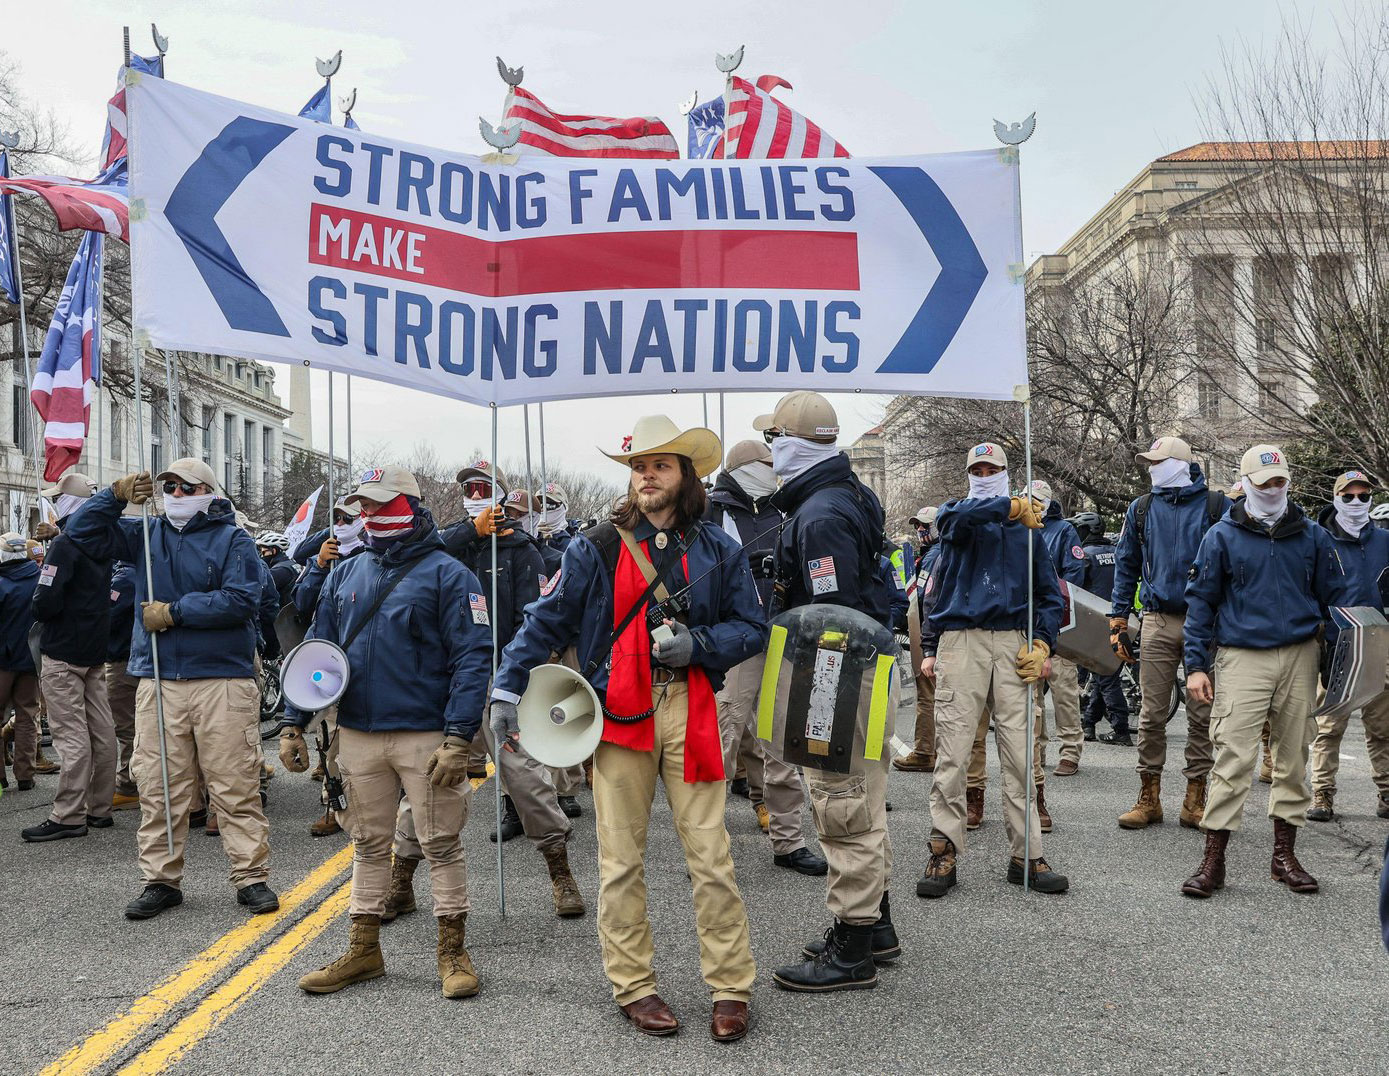 Thomas Rousseau, founder of Patriot Front, leads the group during the 49th Annual March for Life in Washington, D.C., on January 21, 2022 (Jemal Countess/UPI/Alamy)